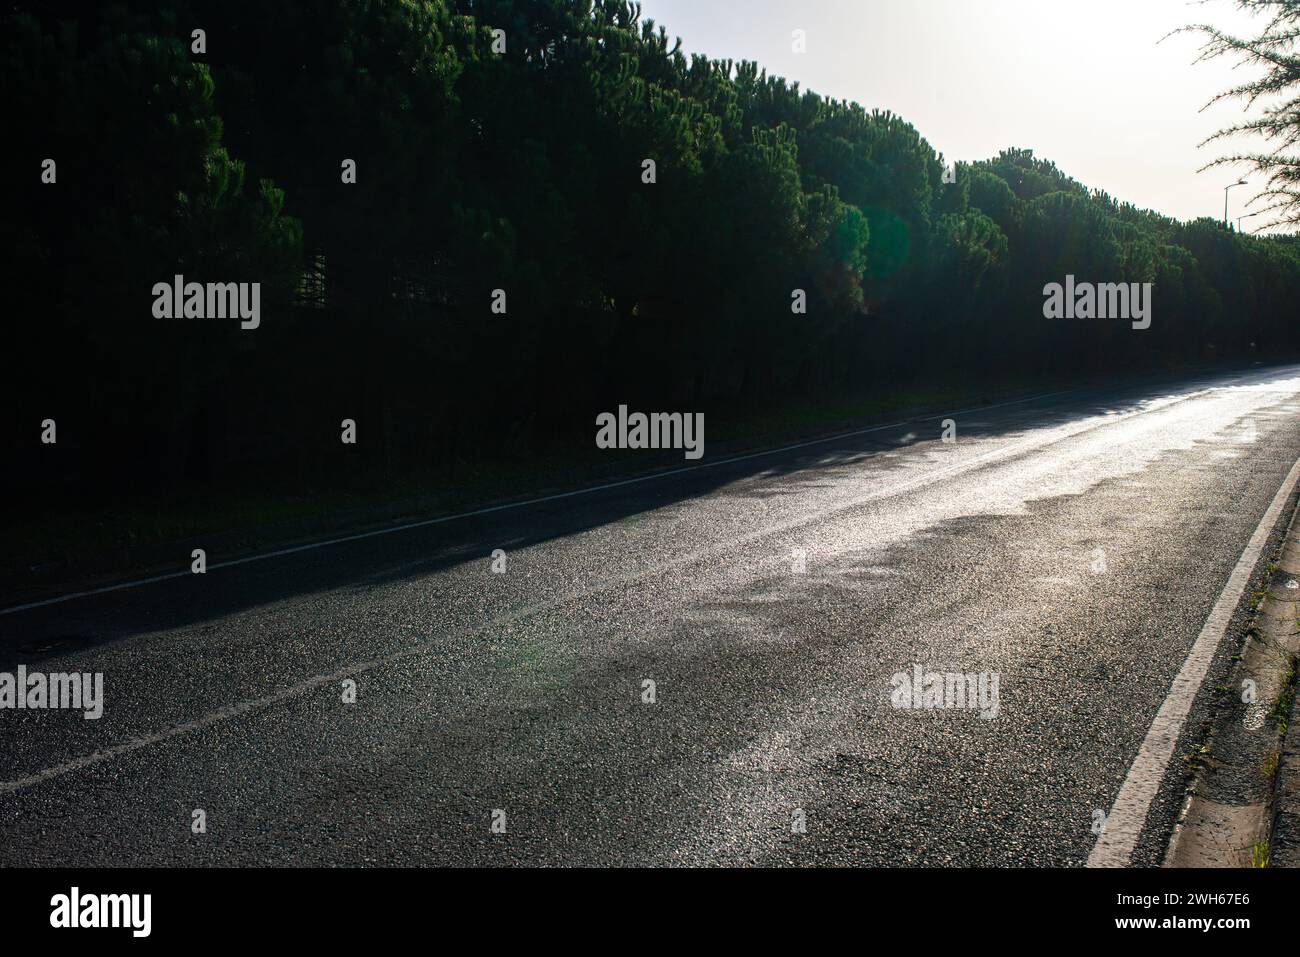 A serene view of a rainy asphalt road in nature, its wet surface glistening with moisture, capturing the tranquility of a gray, damp landscape. Stock Photo